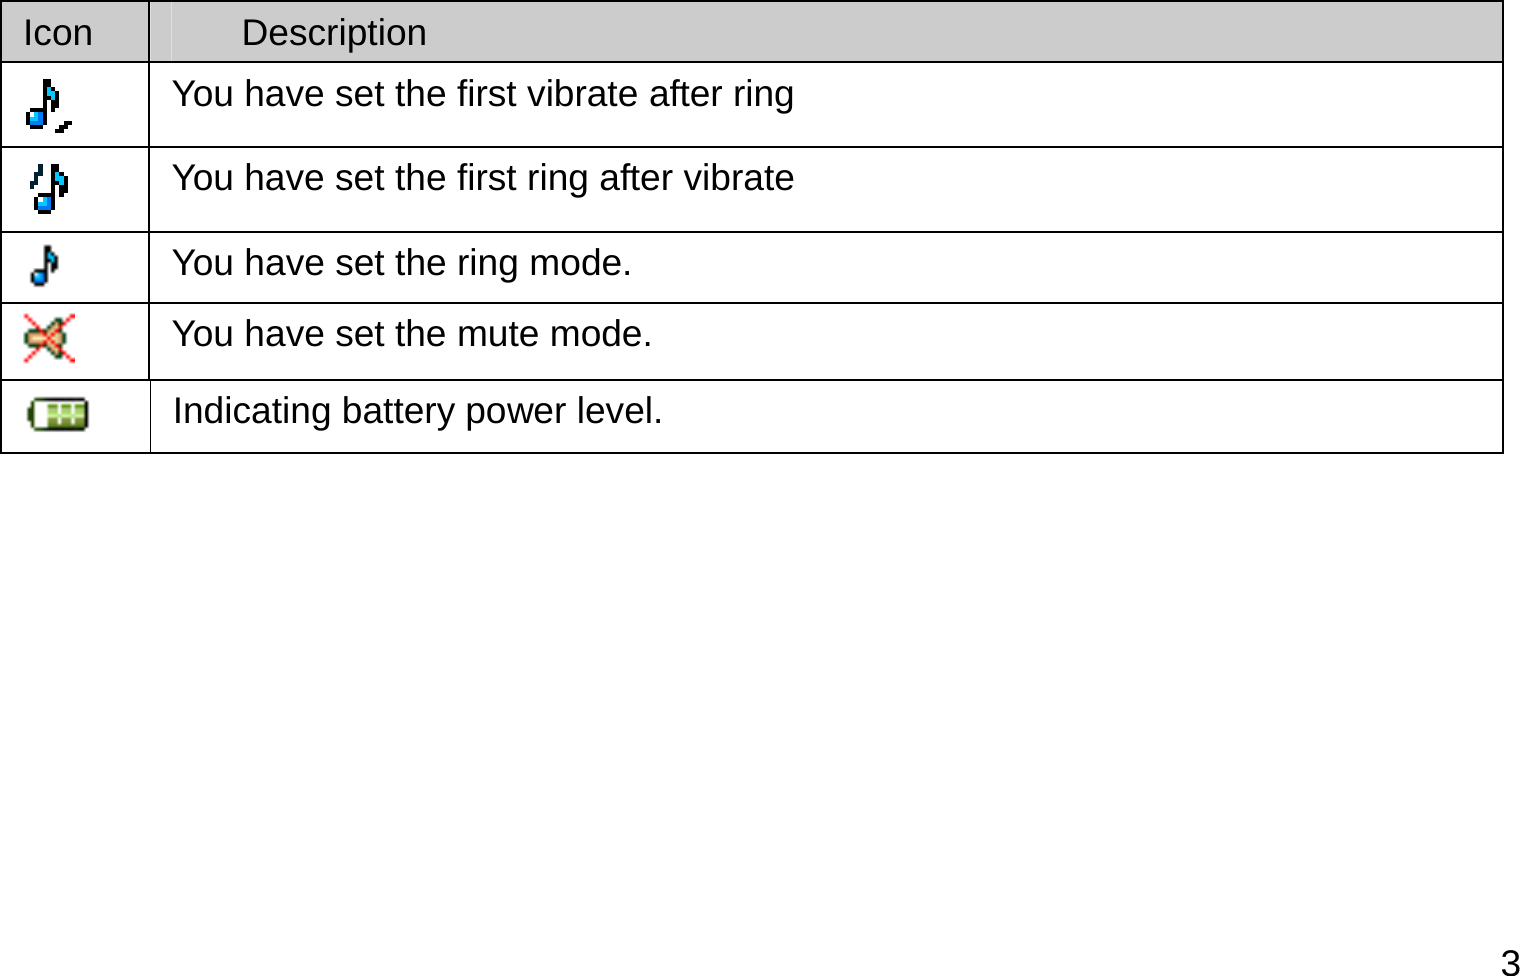  3 Icon  Description  You have set the first vibrate after ring  You have set the first ring after vibrate  You have set the ring mode.  You have set the mute mode.  Indicating battery power level. 